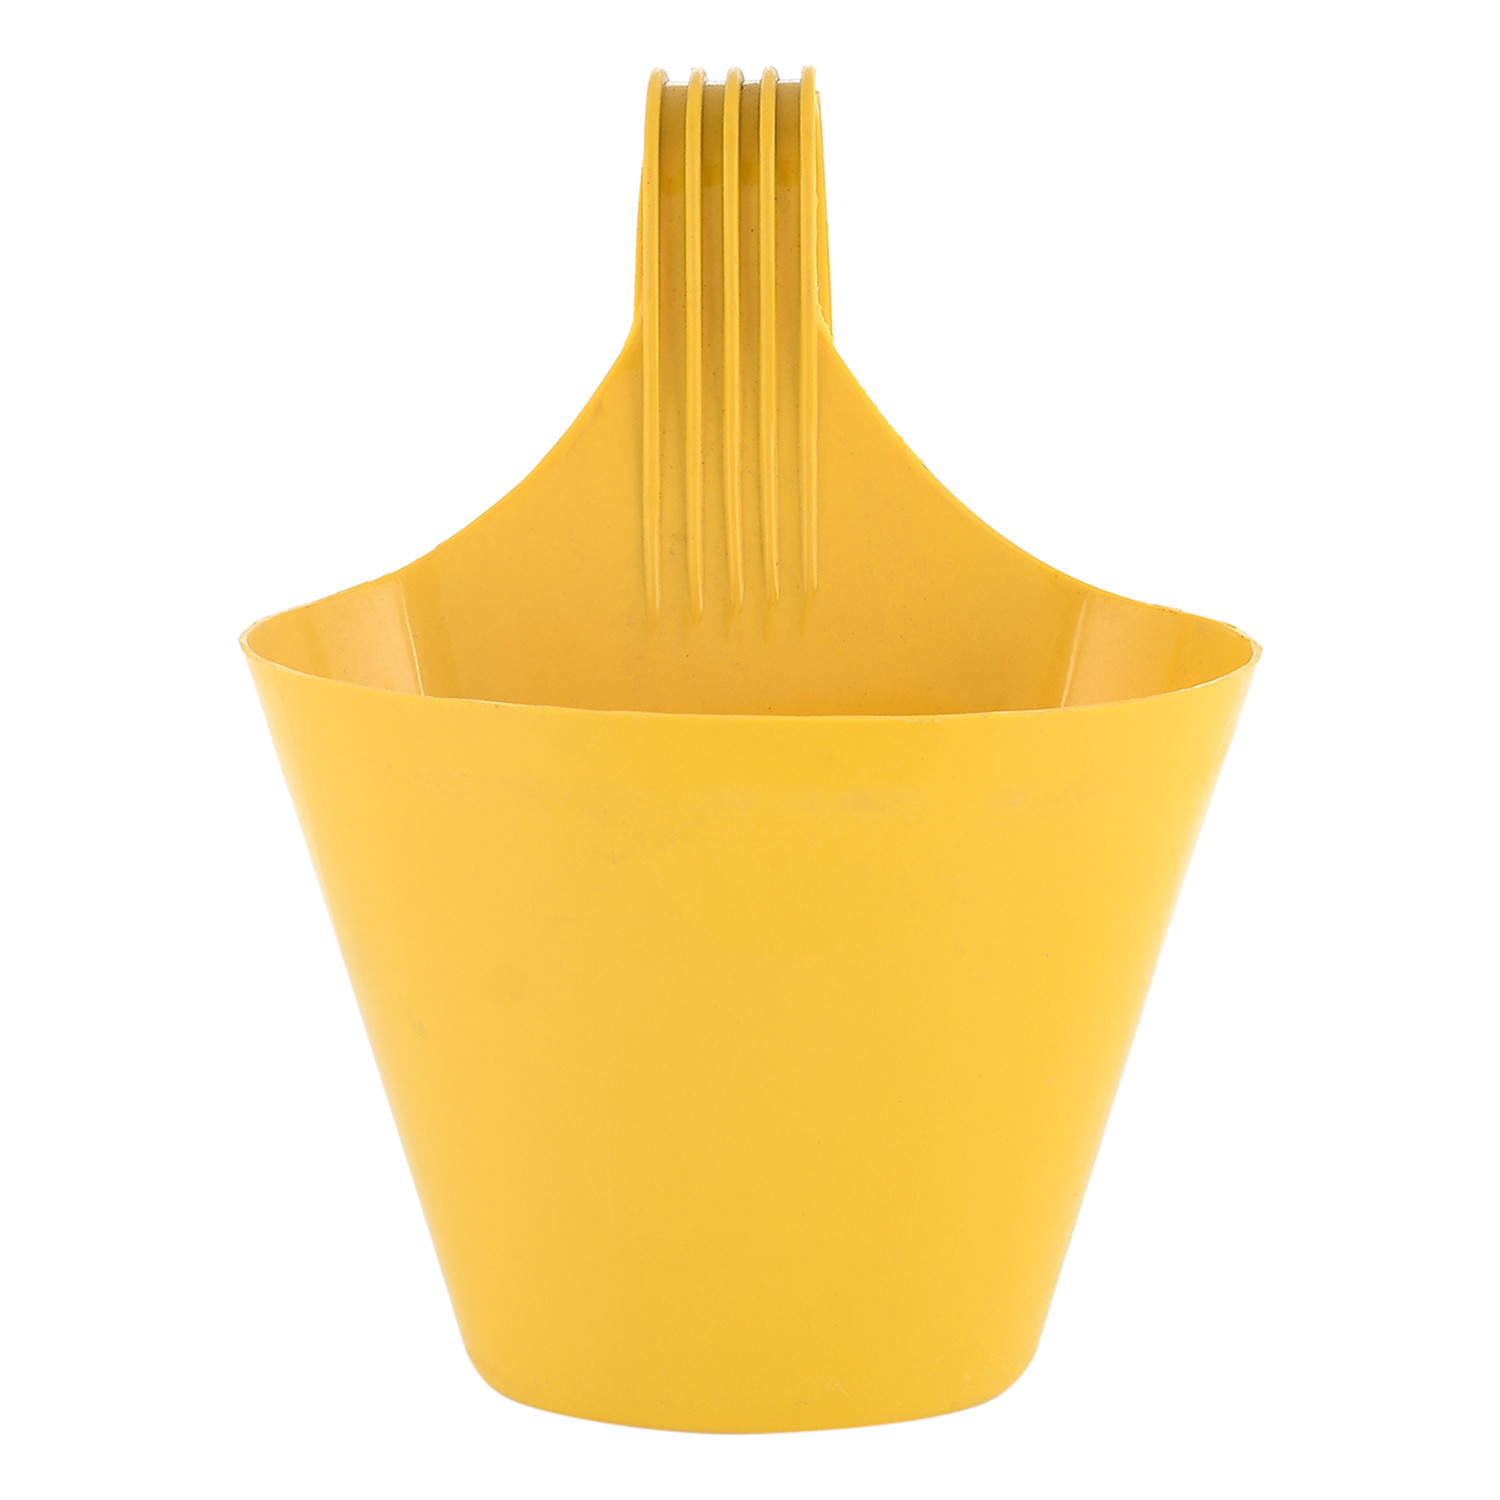 Kuber Industries Hanging Flower Pot|Single Hook Plant Container|Durable Plastic Glossy Finish Pots for Home|Balcony|Garden|9 Inch|(Yellow)